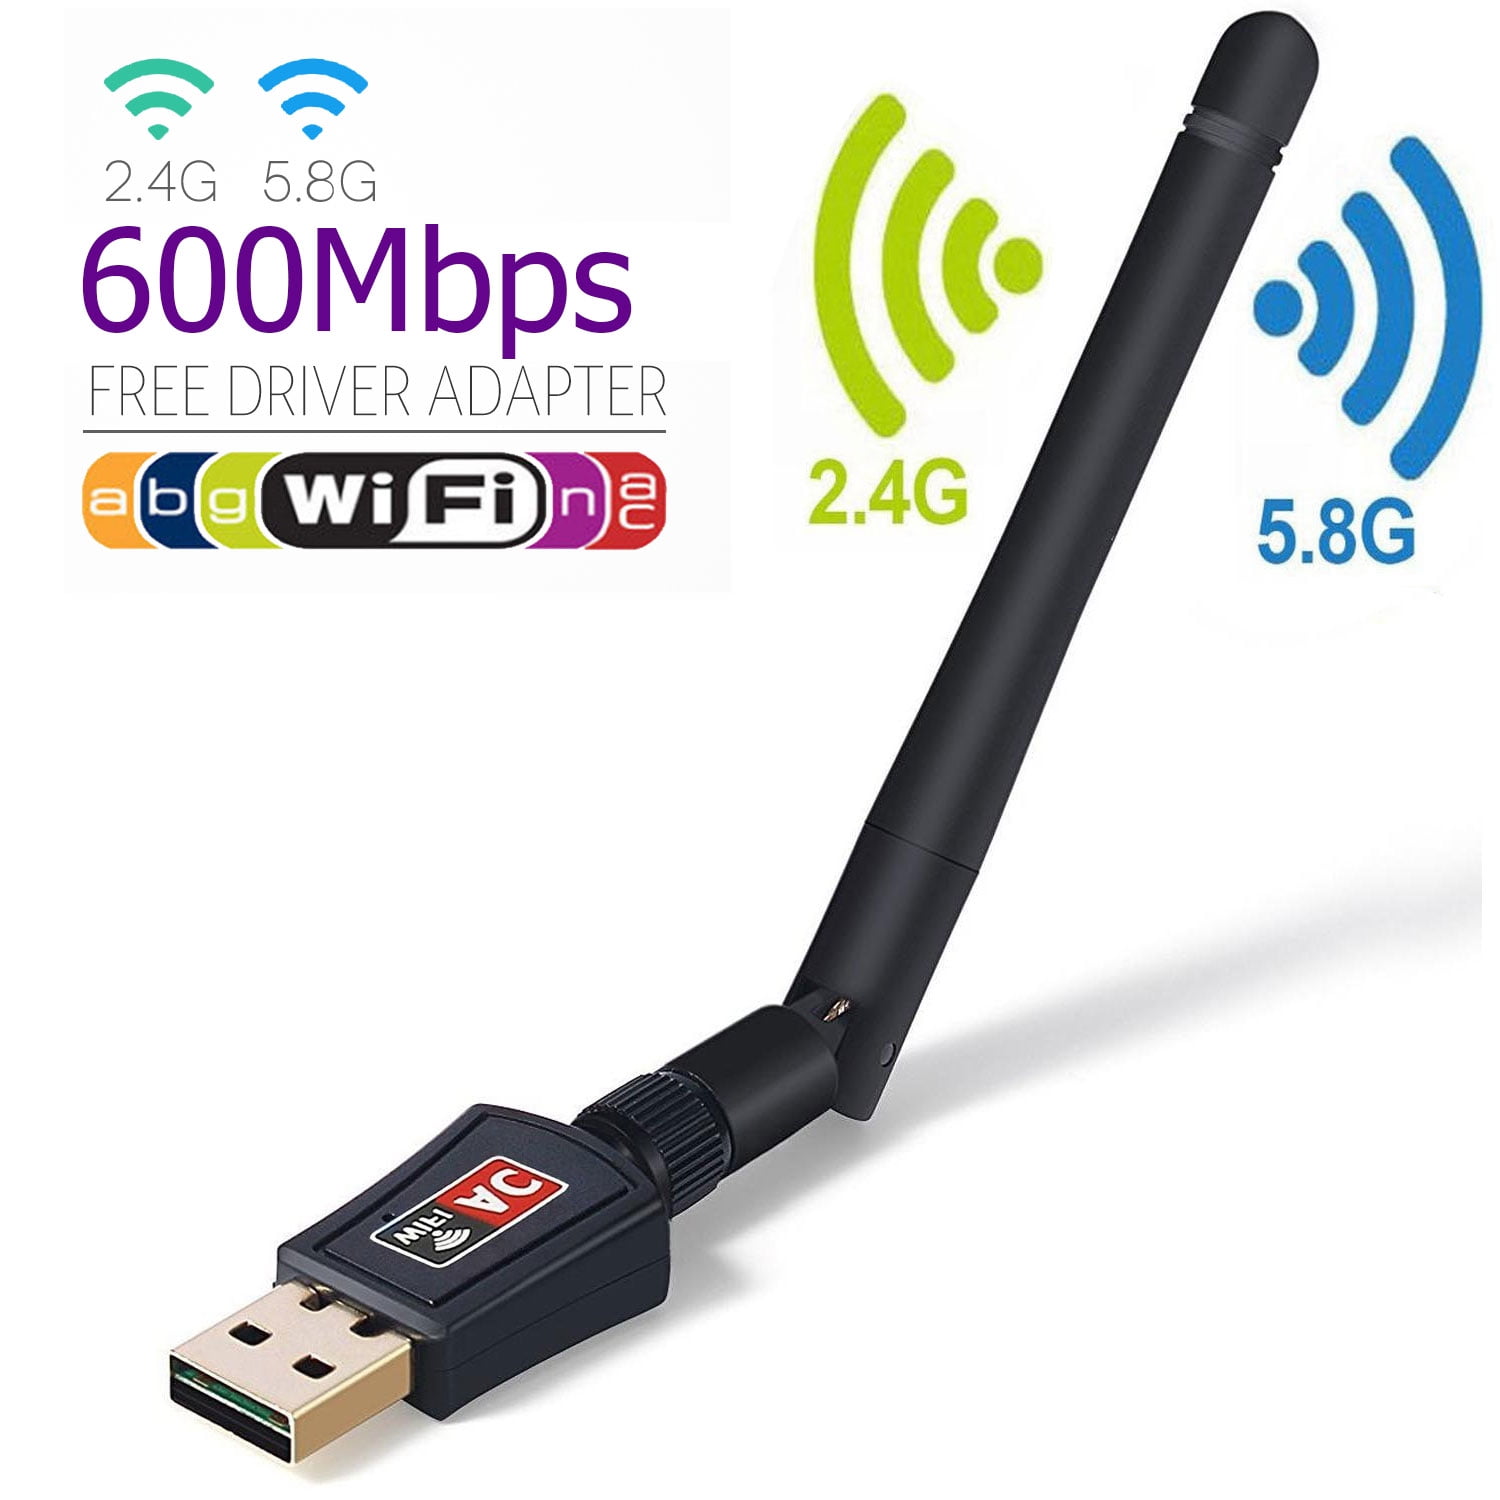 Ylife 600Mbps USB WiFi Adapter with Built-in Driver,2.4GHz/5GHz Dual Band Wireless WiFi Adapter with 5dBi Antenna for Desktop Laptop PC Computer